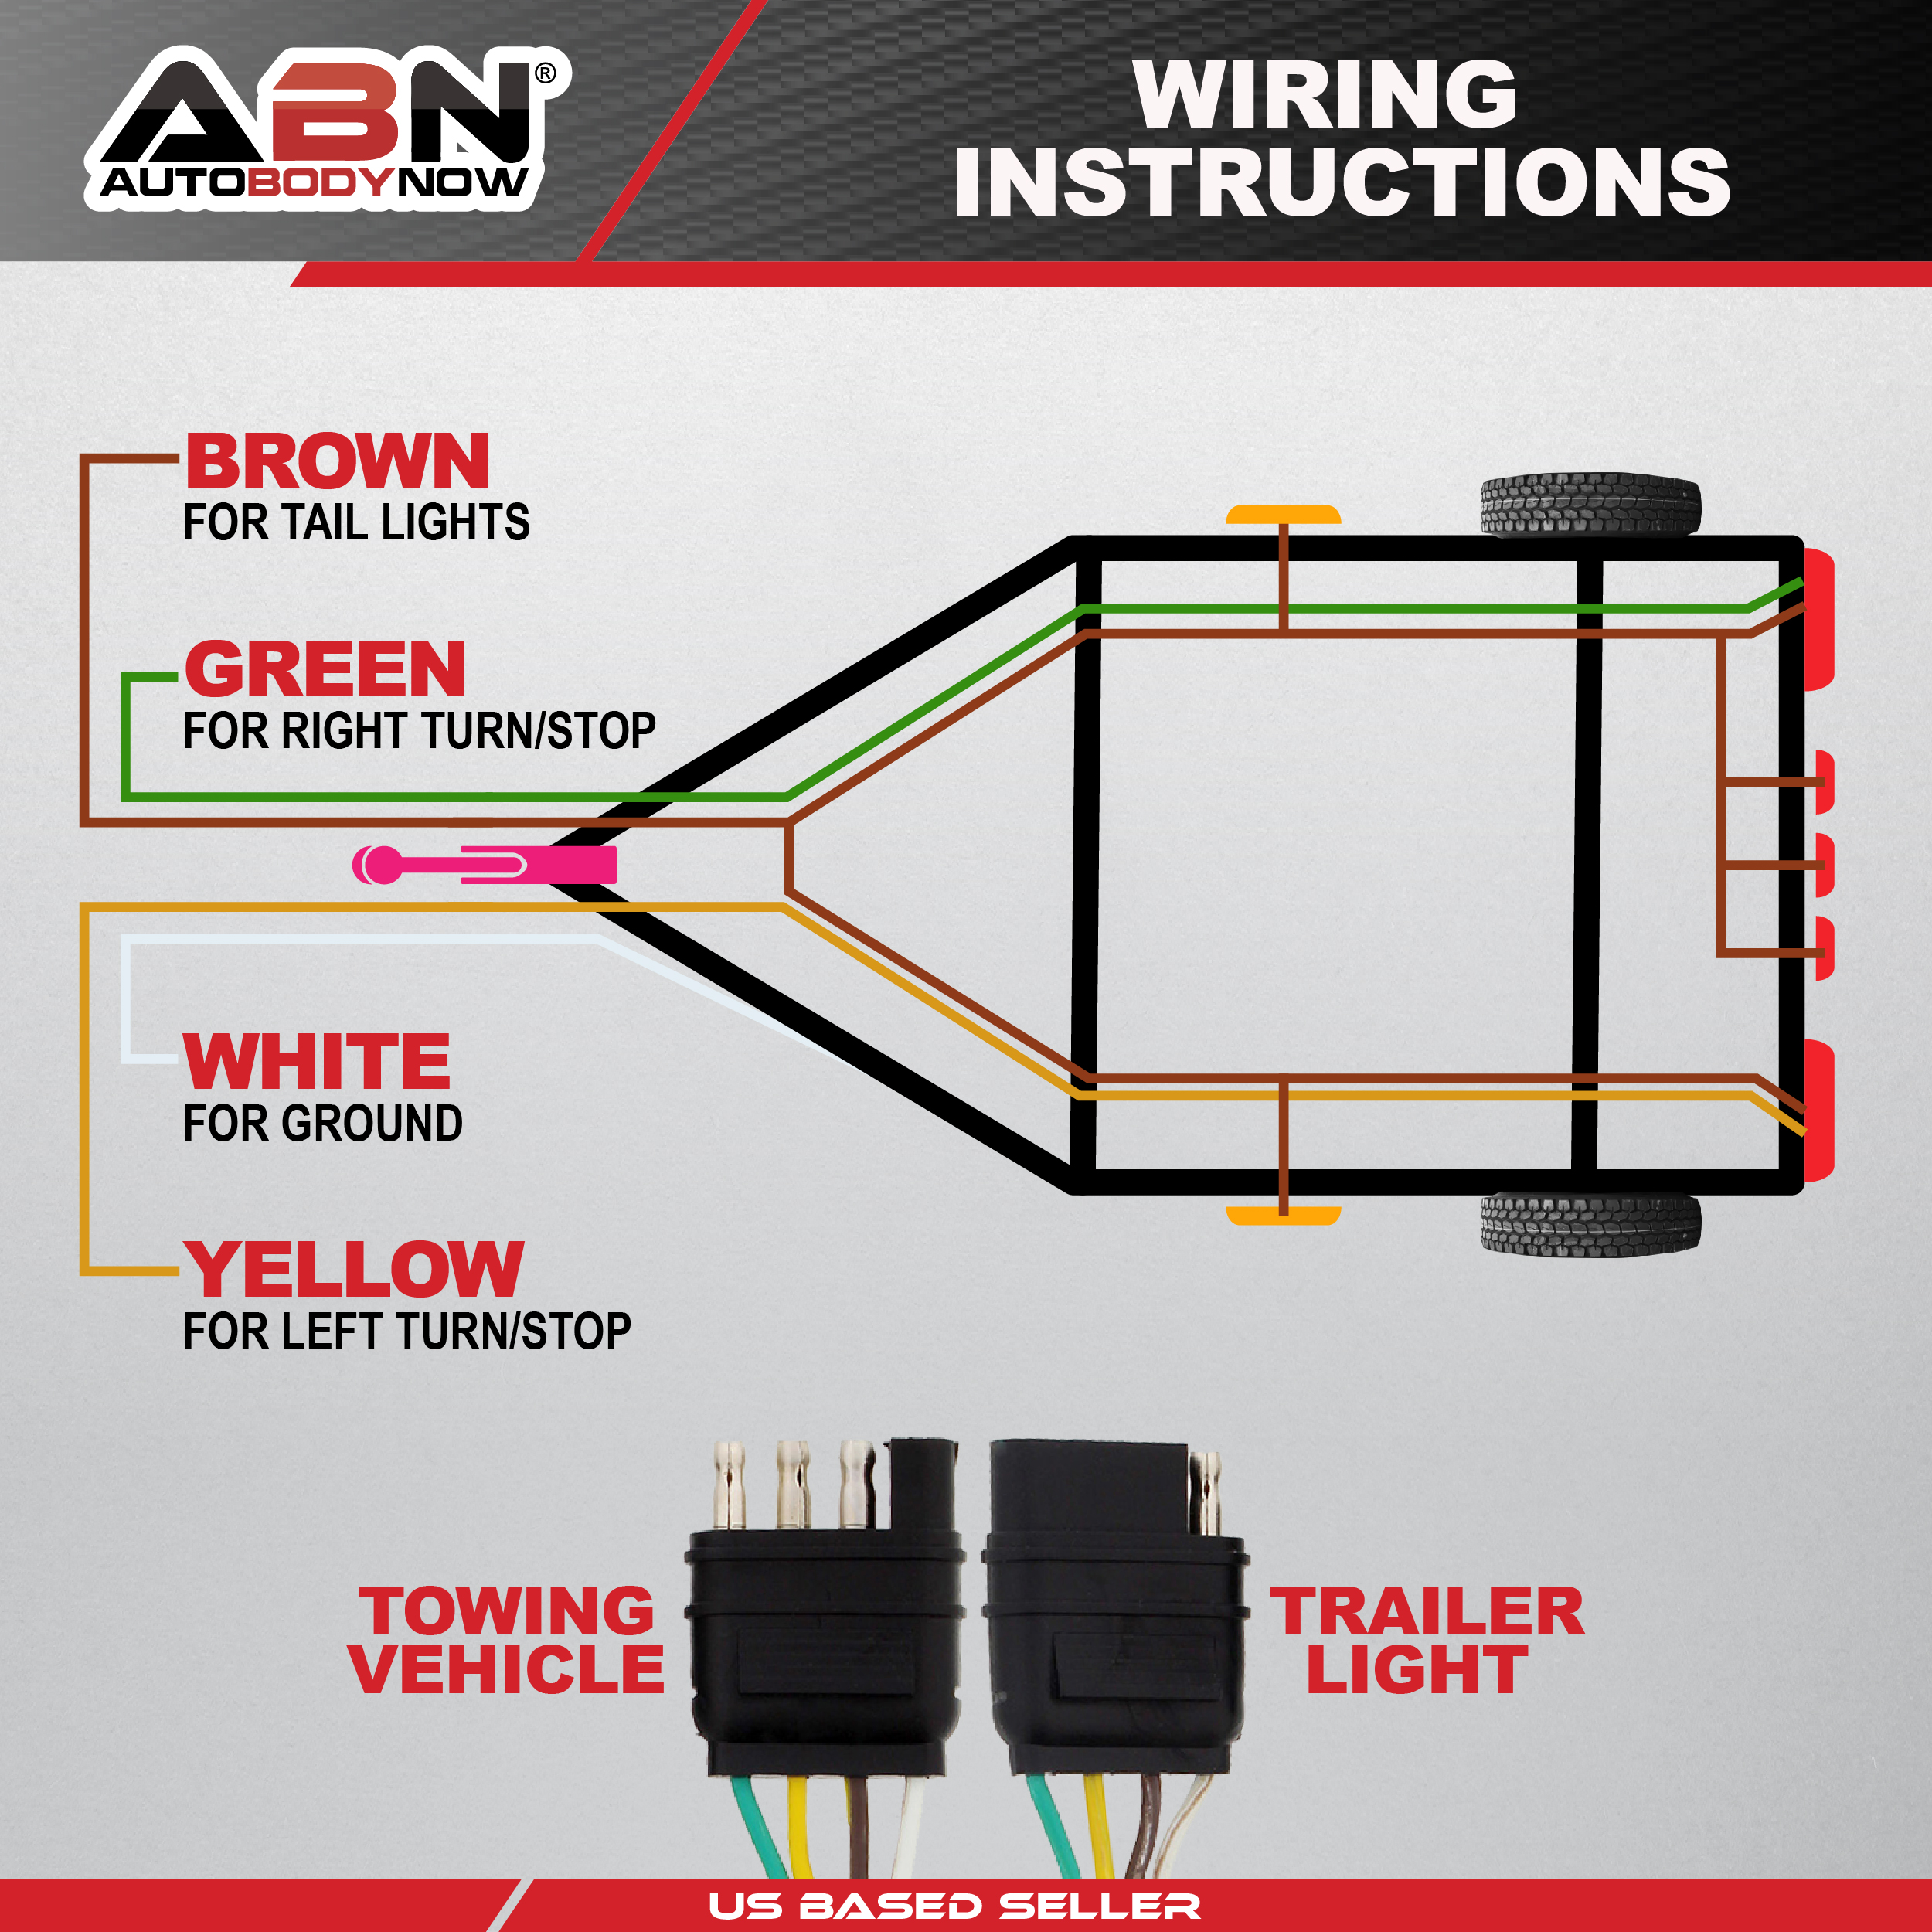 ABN 1909 - 4 Way 4 Pin Plug 20 Gauge Trailer Light Wiring Harness Extension 8ft - image 4 of 7